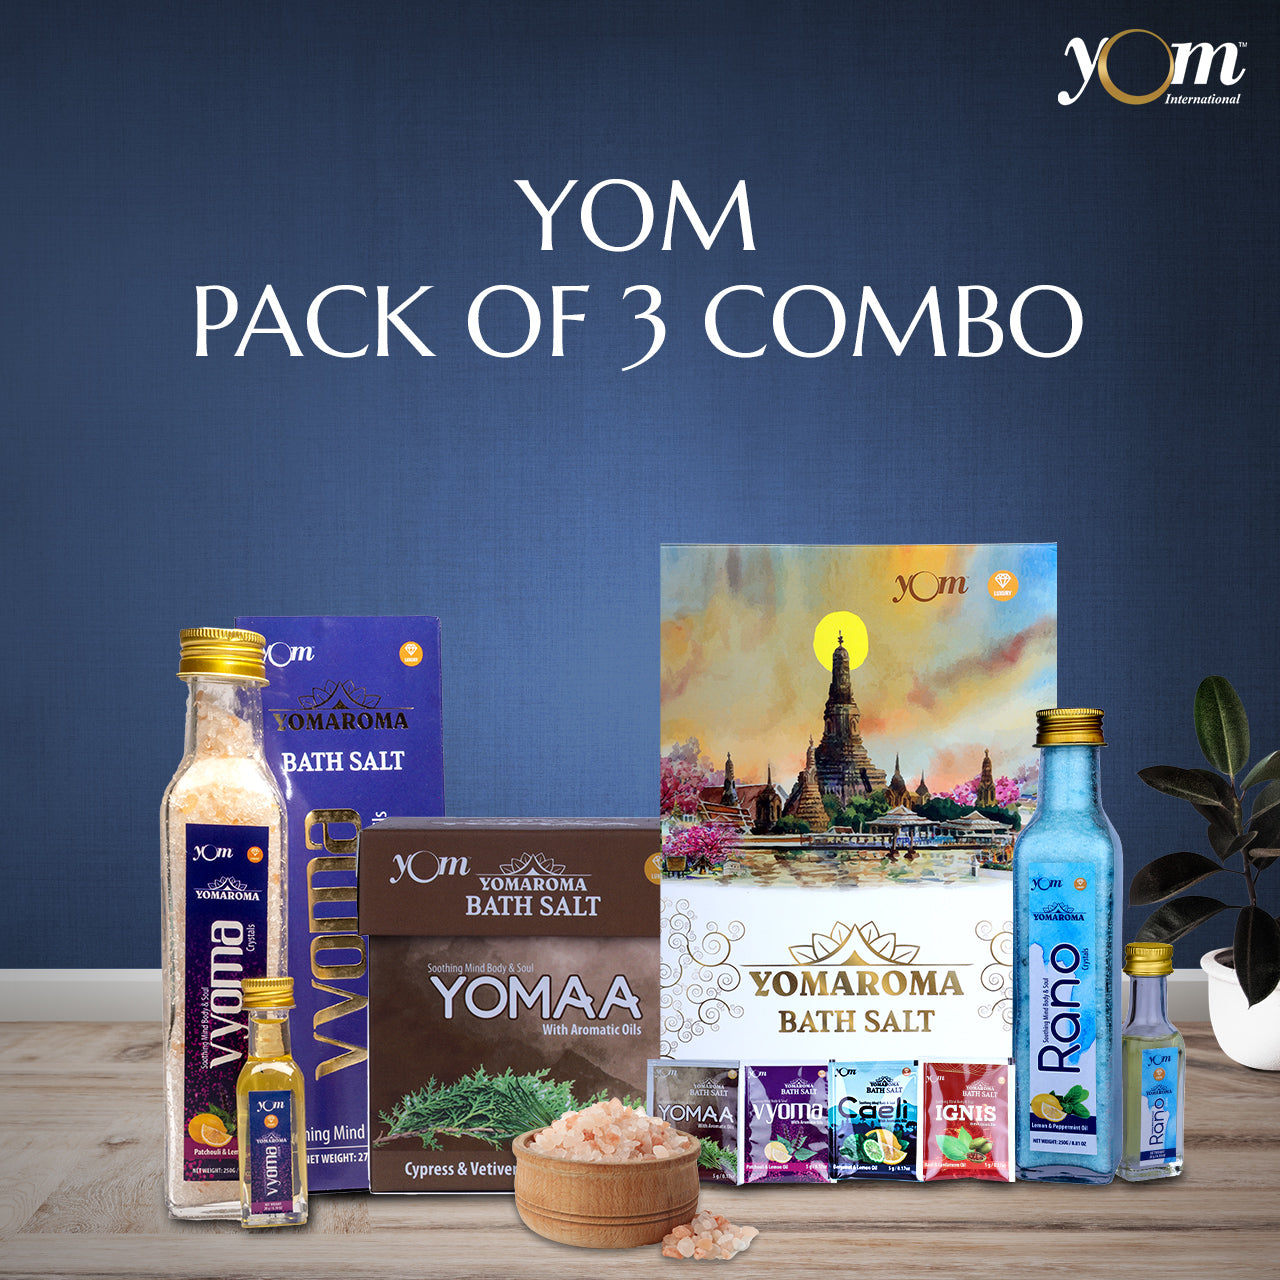 YOM YOMAROMA Vyoma Bath Salt With Aromatic Oil,Yomaa Bath Salt With Aromatic Oils ,Rano Bath Salt Gift Box Combo Pack - 3 Nos